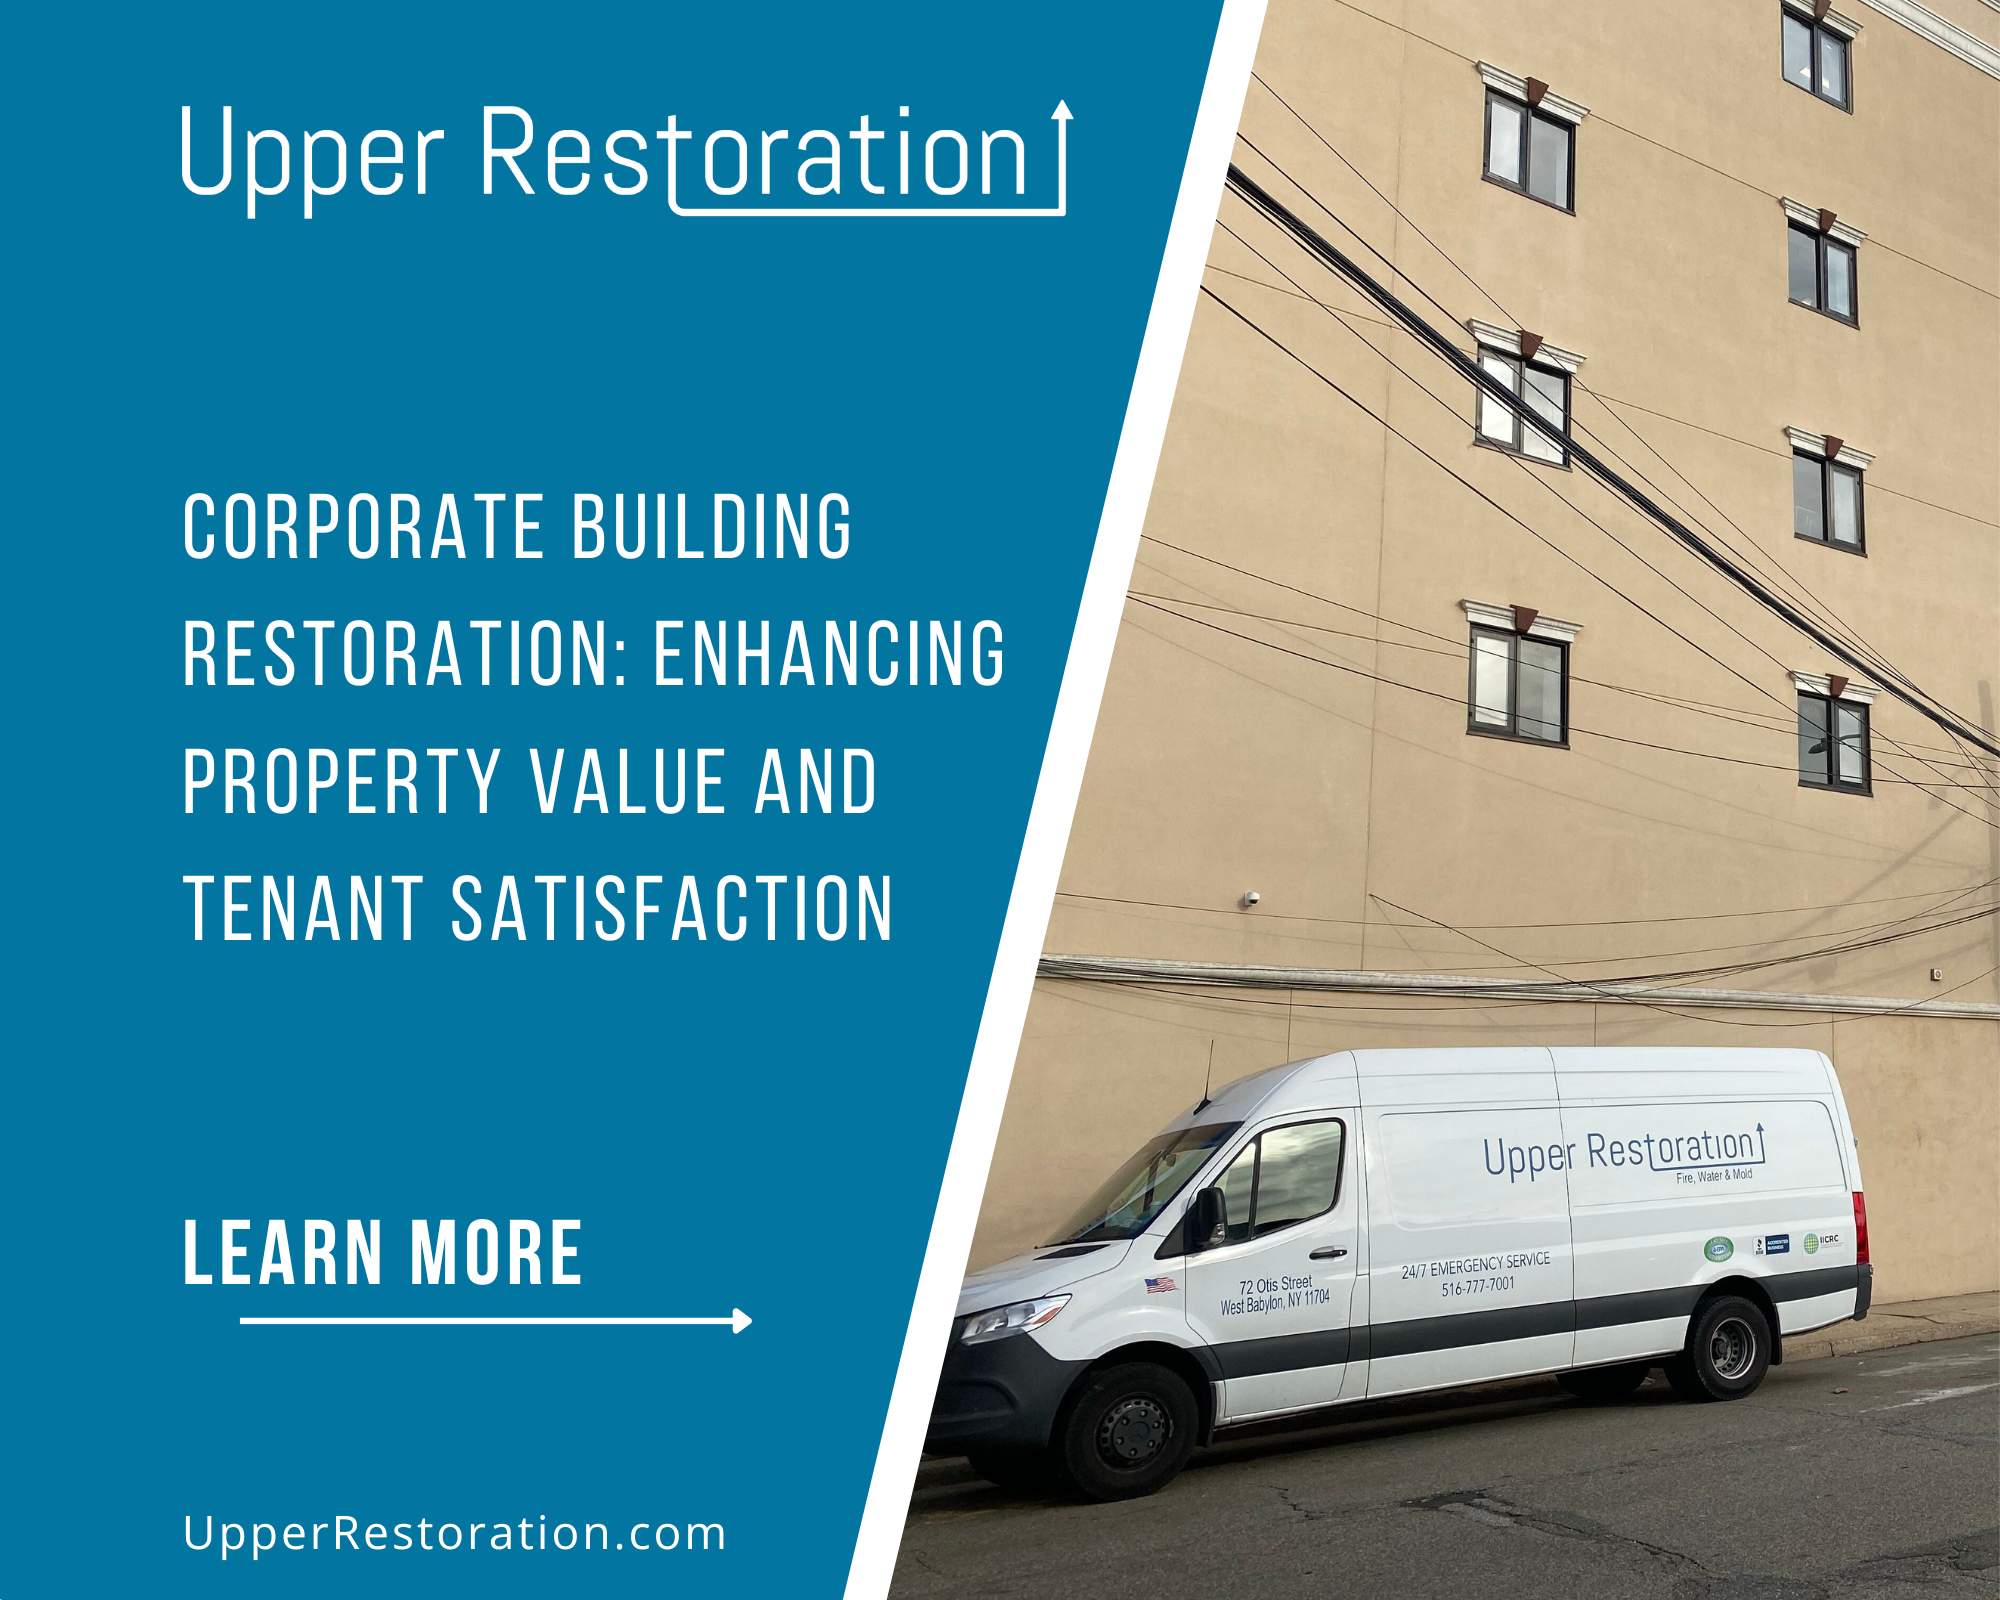 Corporate Building Restoration: Enhancing Property Value and Tenant Satisfaction